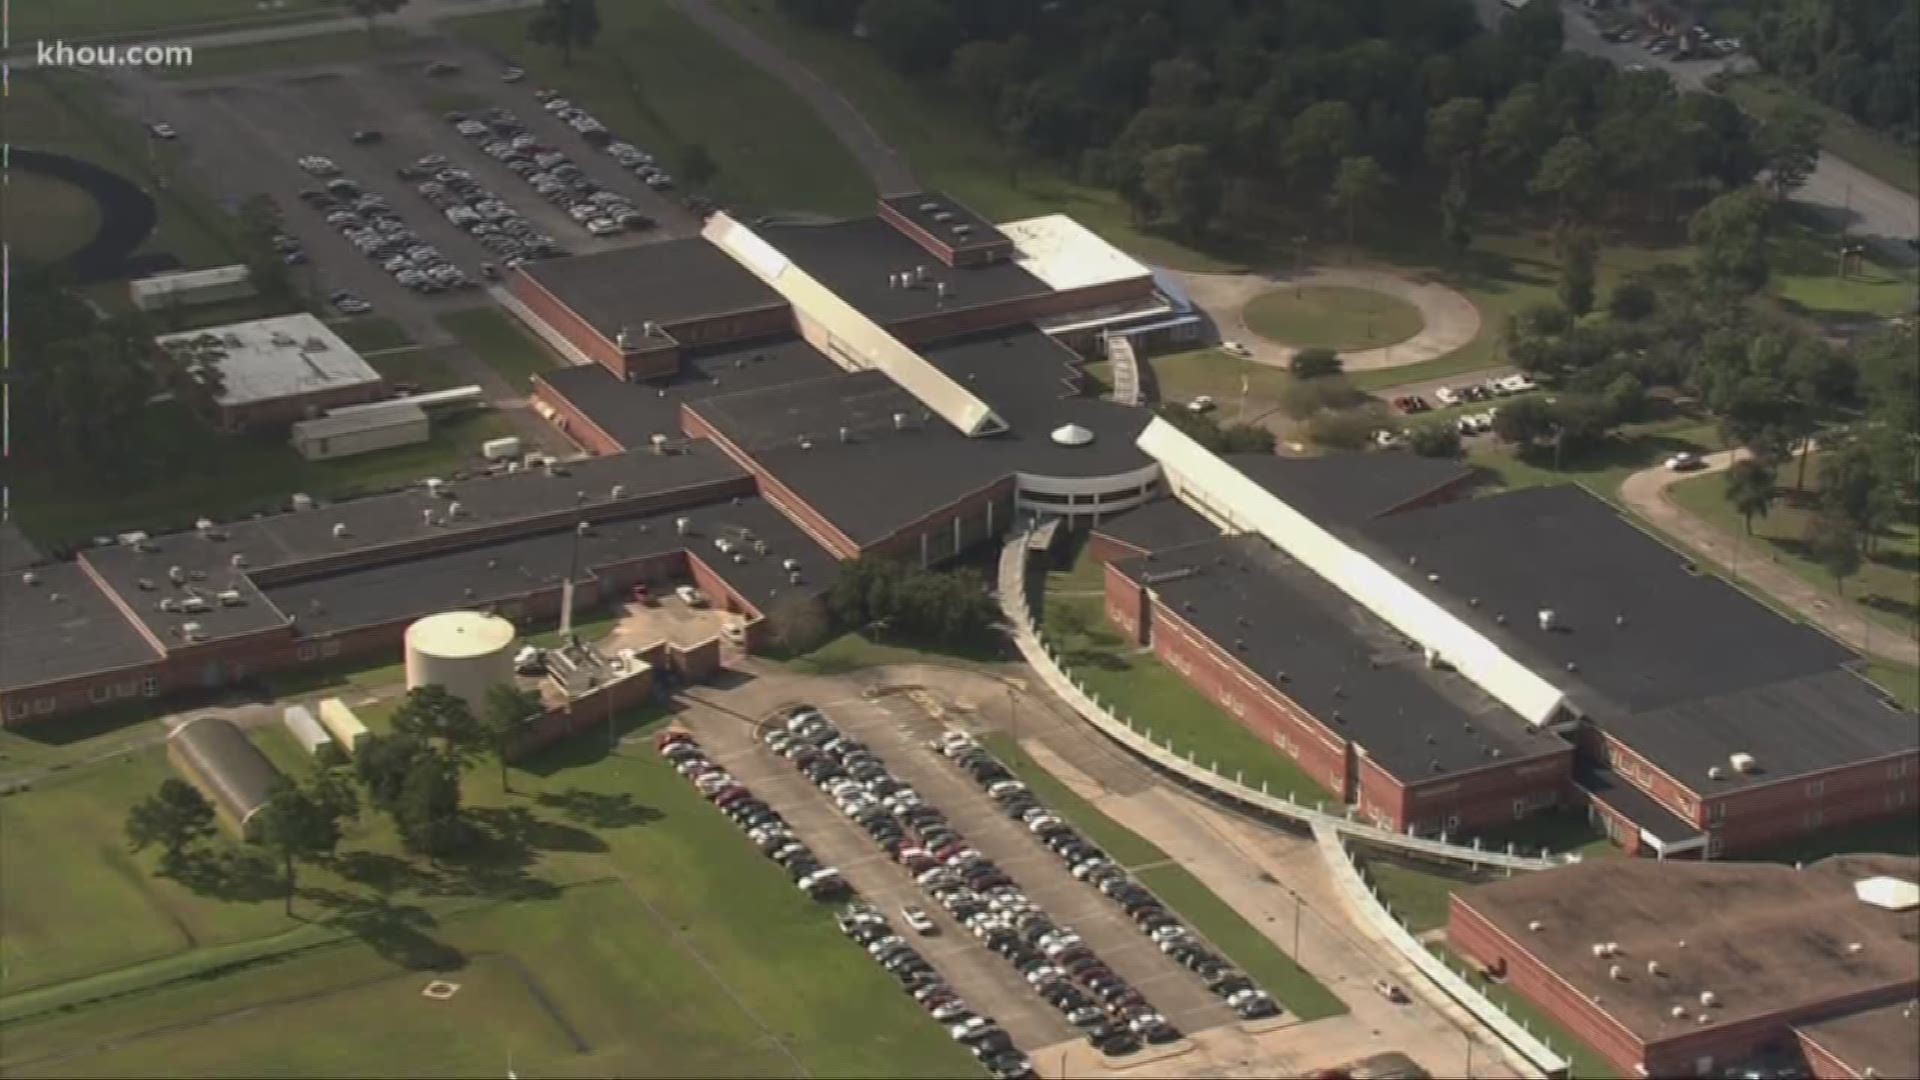 'Lock out' lifted at Channelview ISD campuses following SWAT standoff